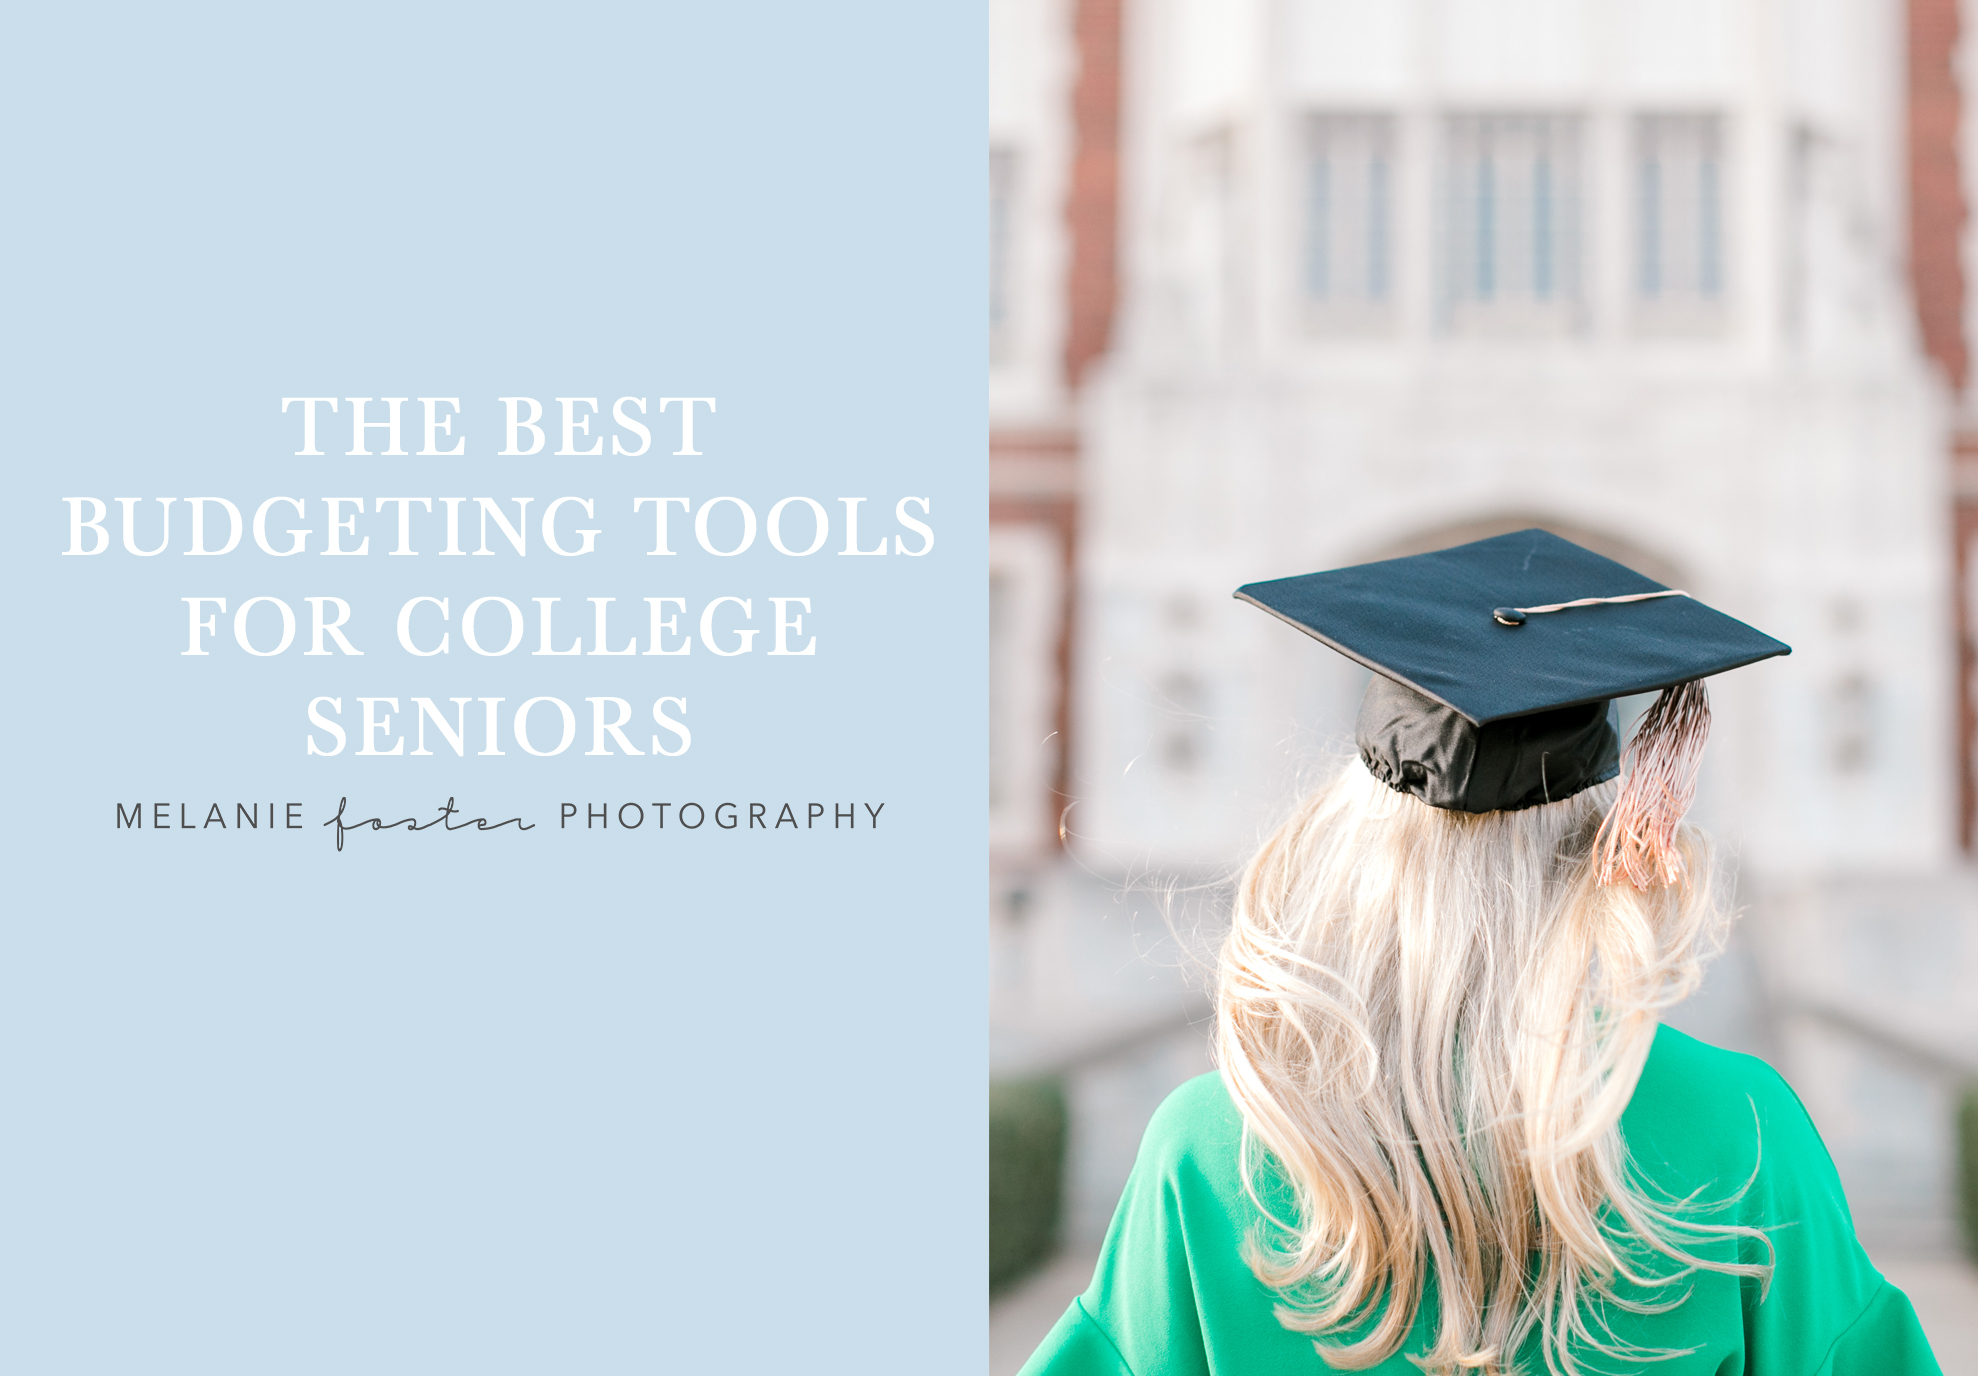 Budgeting Tools for College Seniors